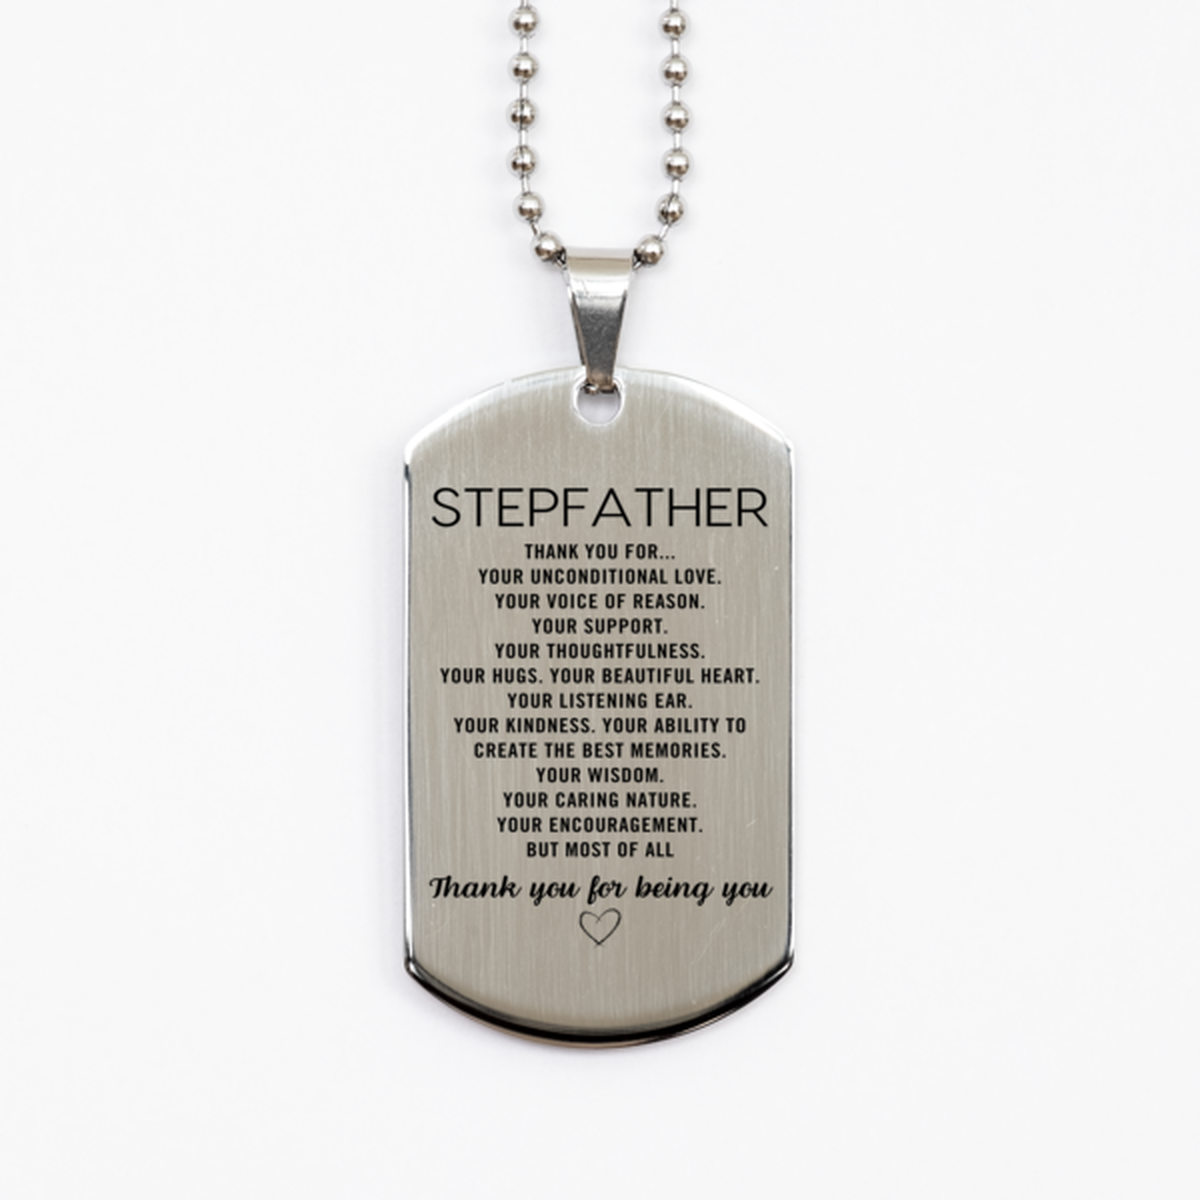 Stepfather Silver Dog Tag Custom, Engraved Gifts For Stepfather Christmas Graduation Birthday Gifts for Men Women Stepfather Thank you for Your unconditional love